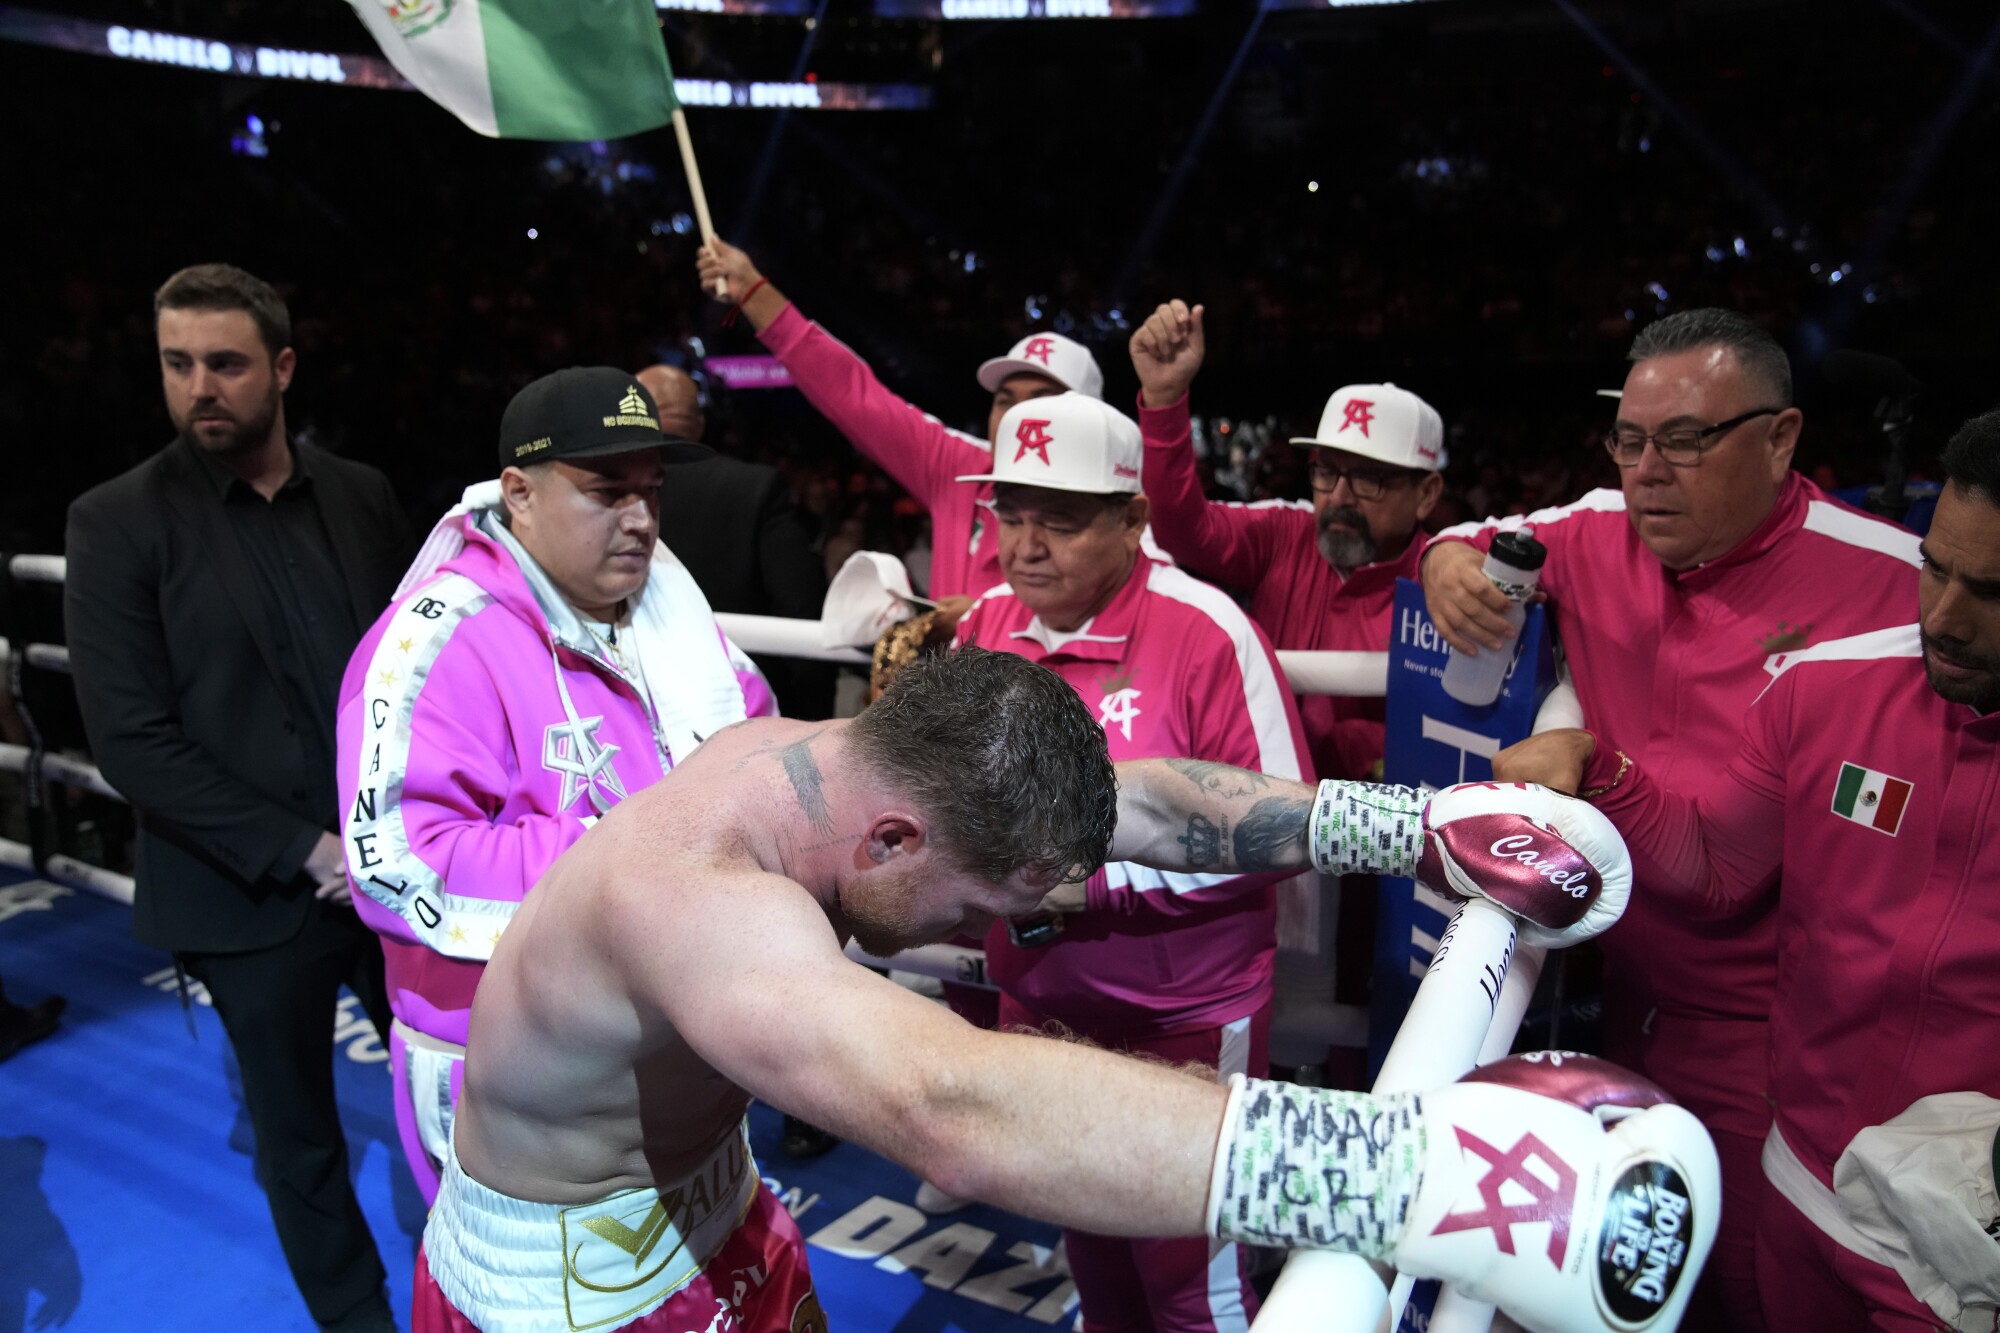 Canelo Alvarez, of Mexico, reacts after a light heavyweight title fight against Dmitry Bivol